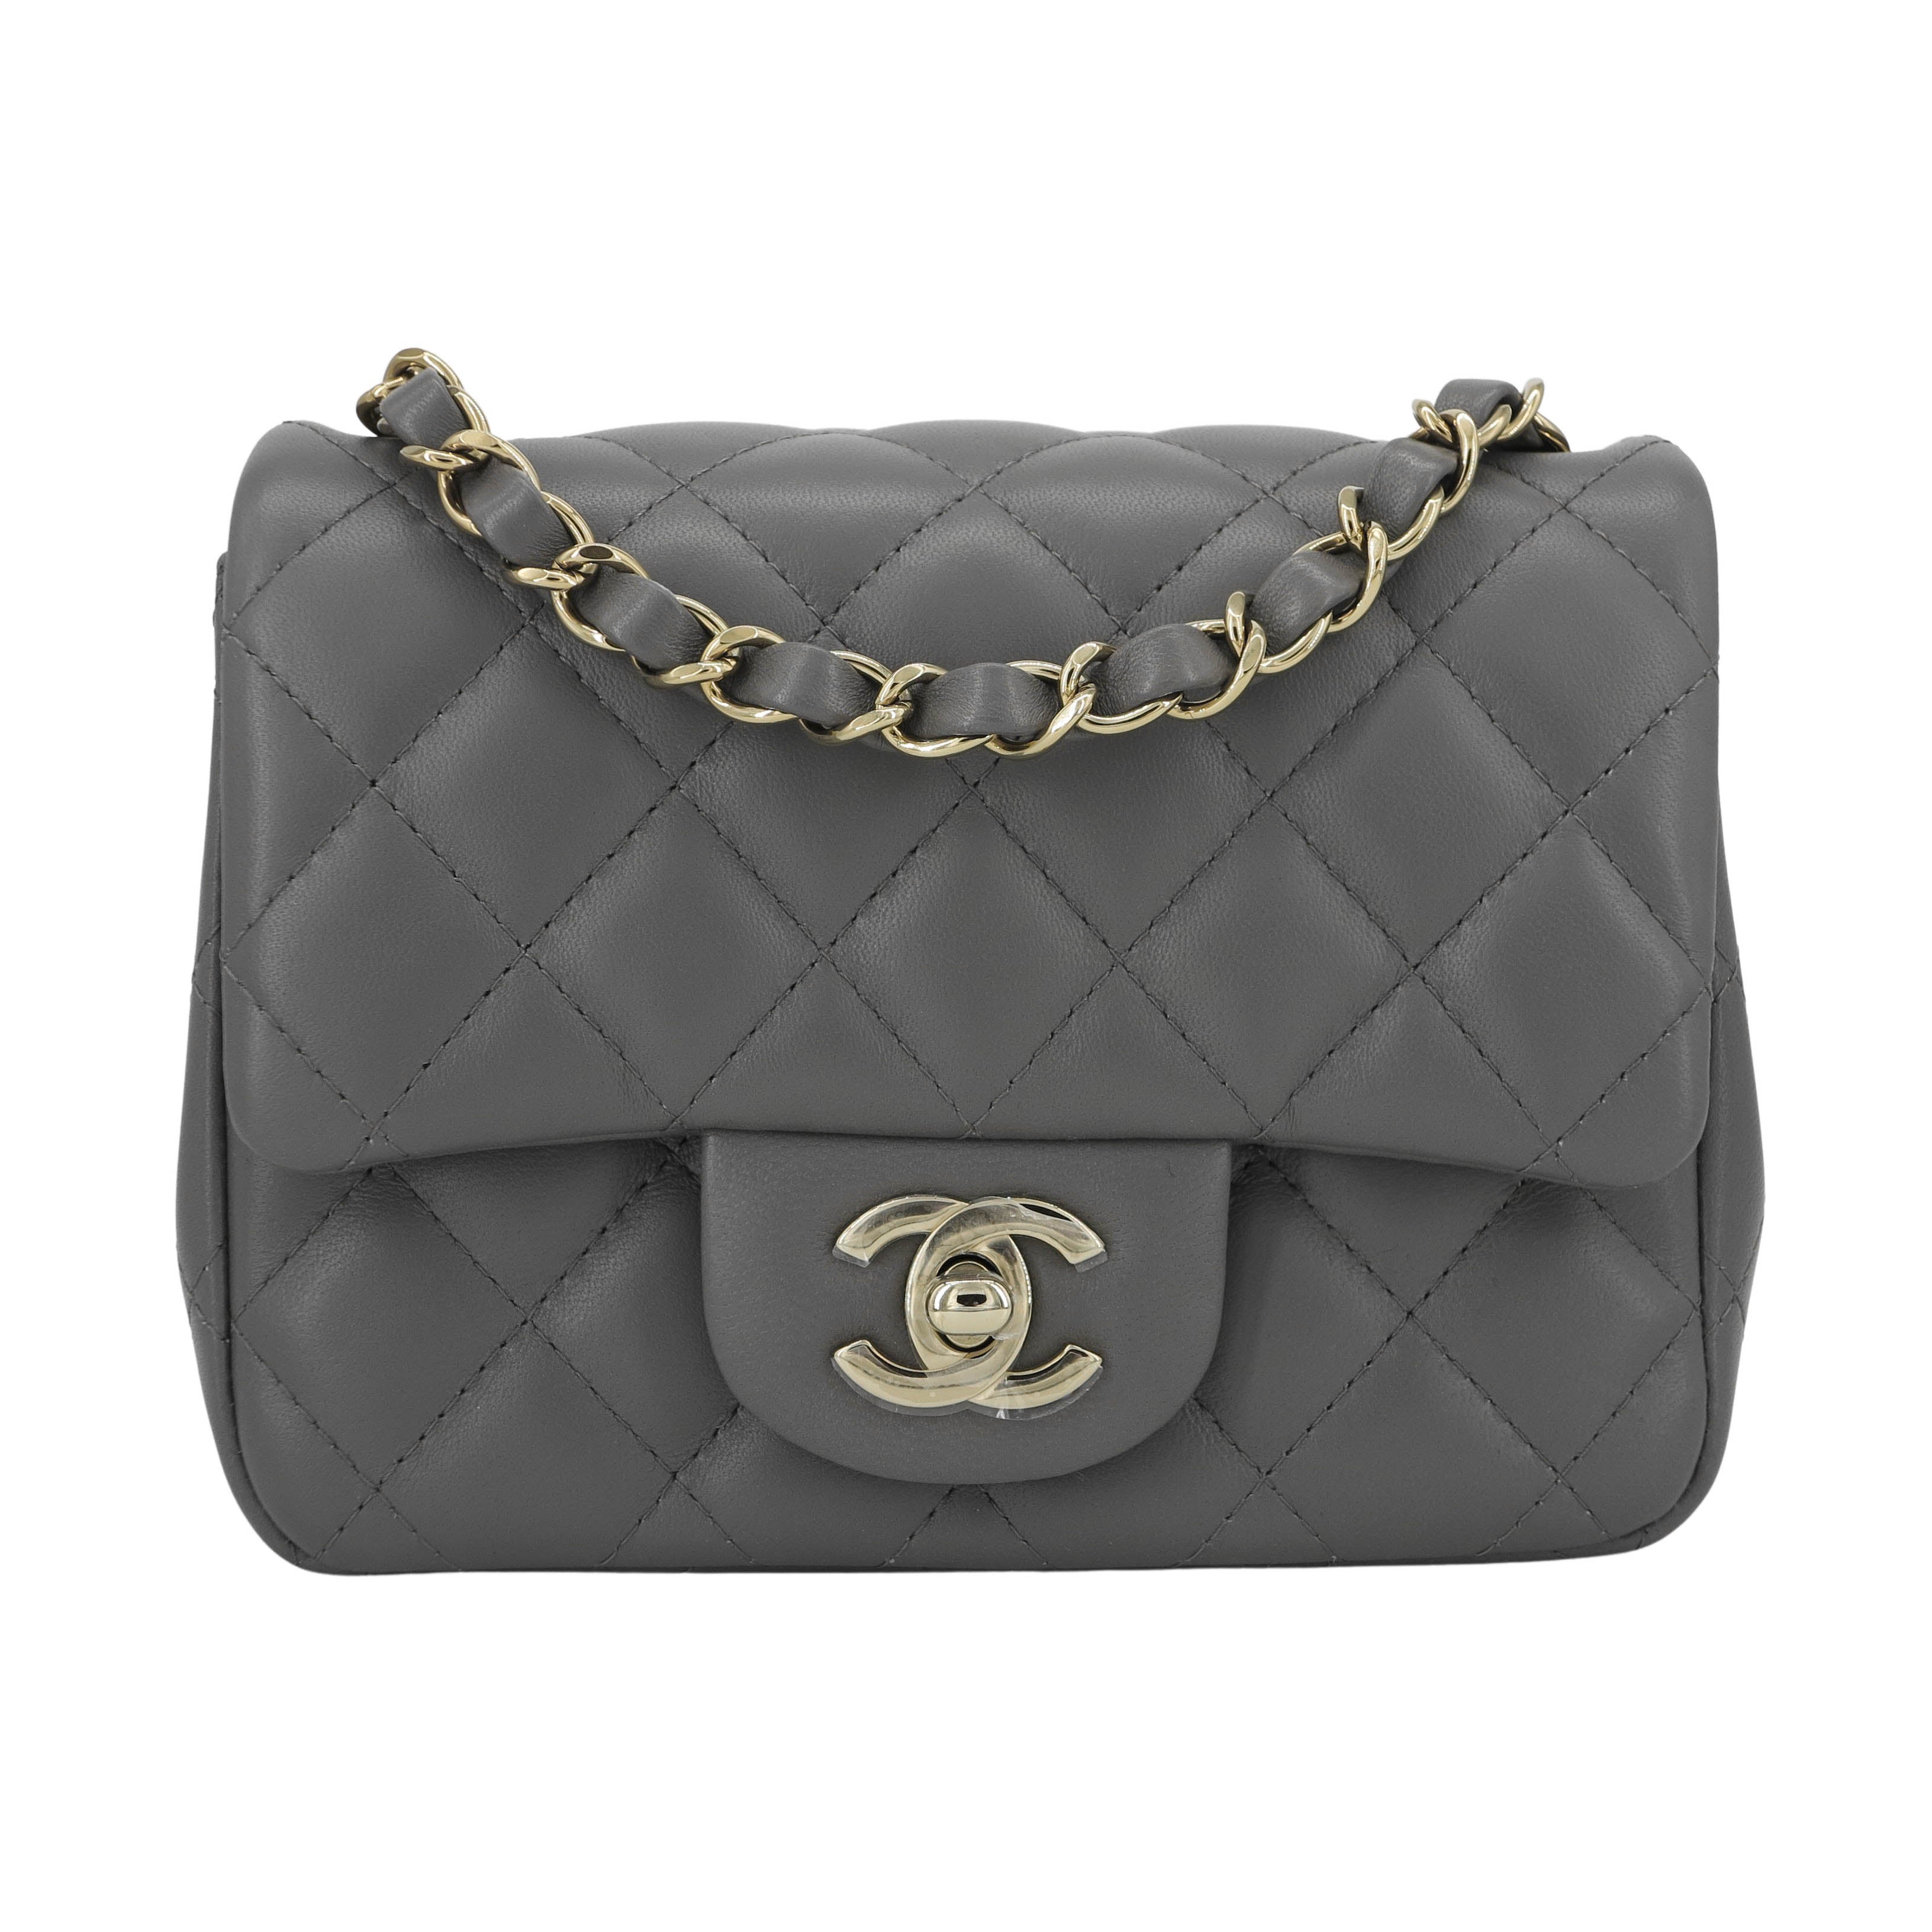 Chanel's Mini Flap Is The Official Bag Of The “Old Money” Aesthetic